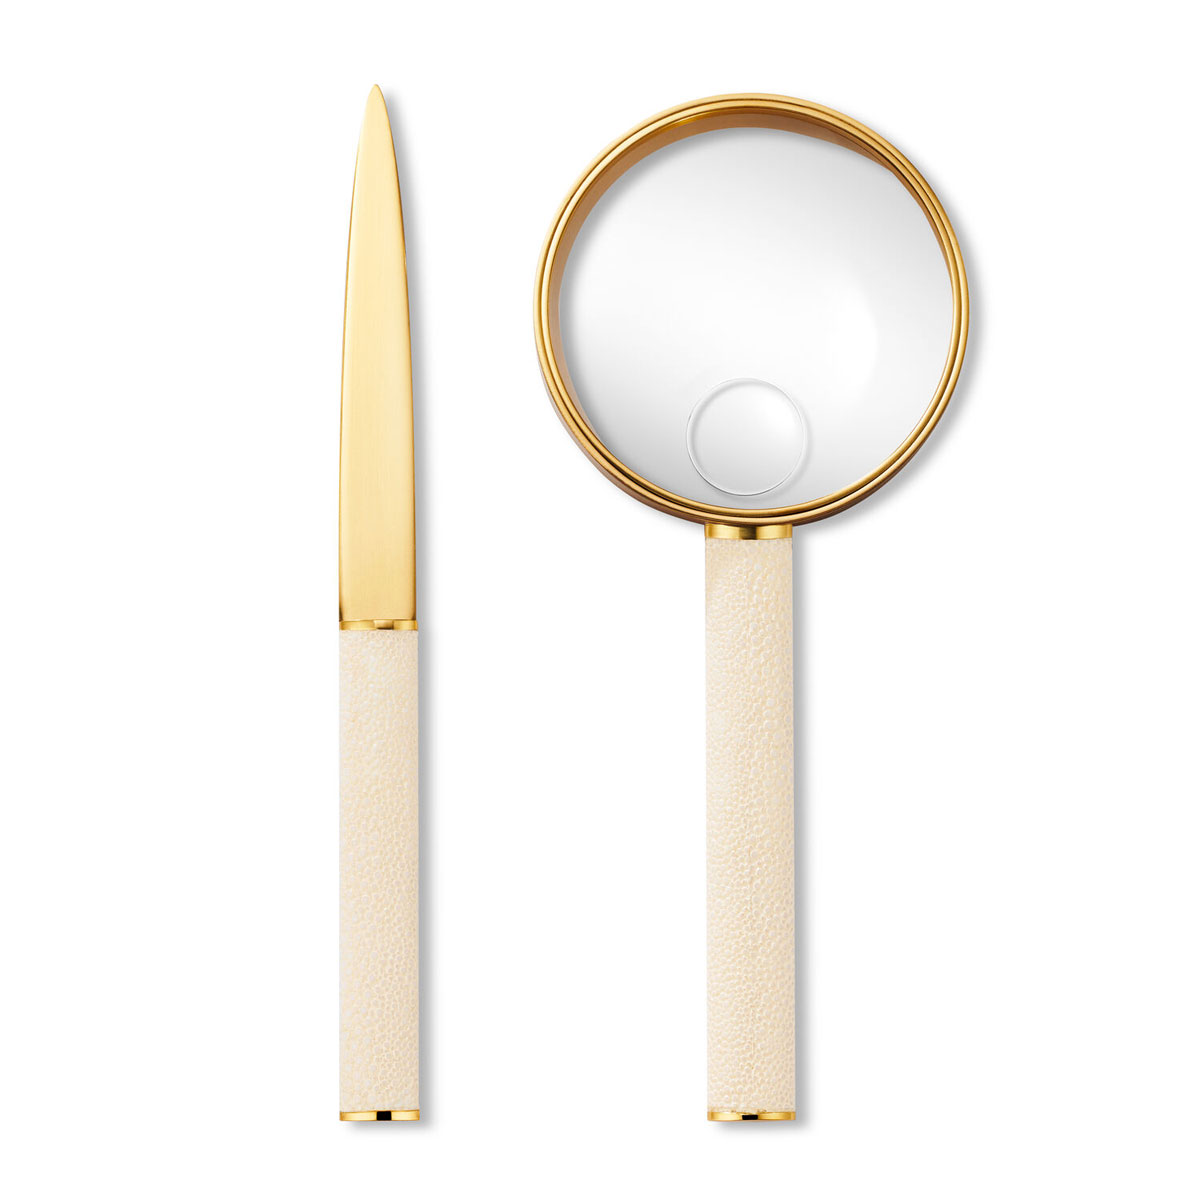 Aerin Shagreen Magnifying Glass and Letter Opener Set, Cream